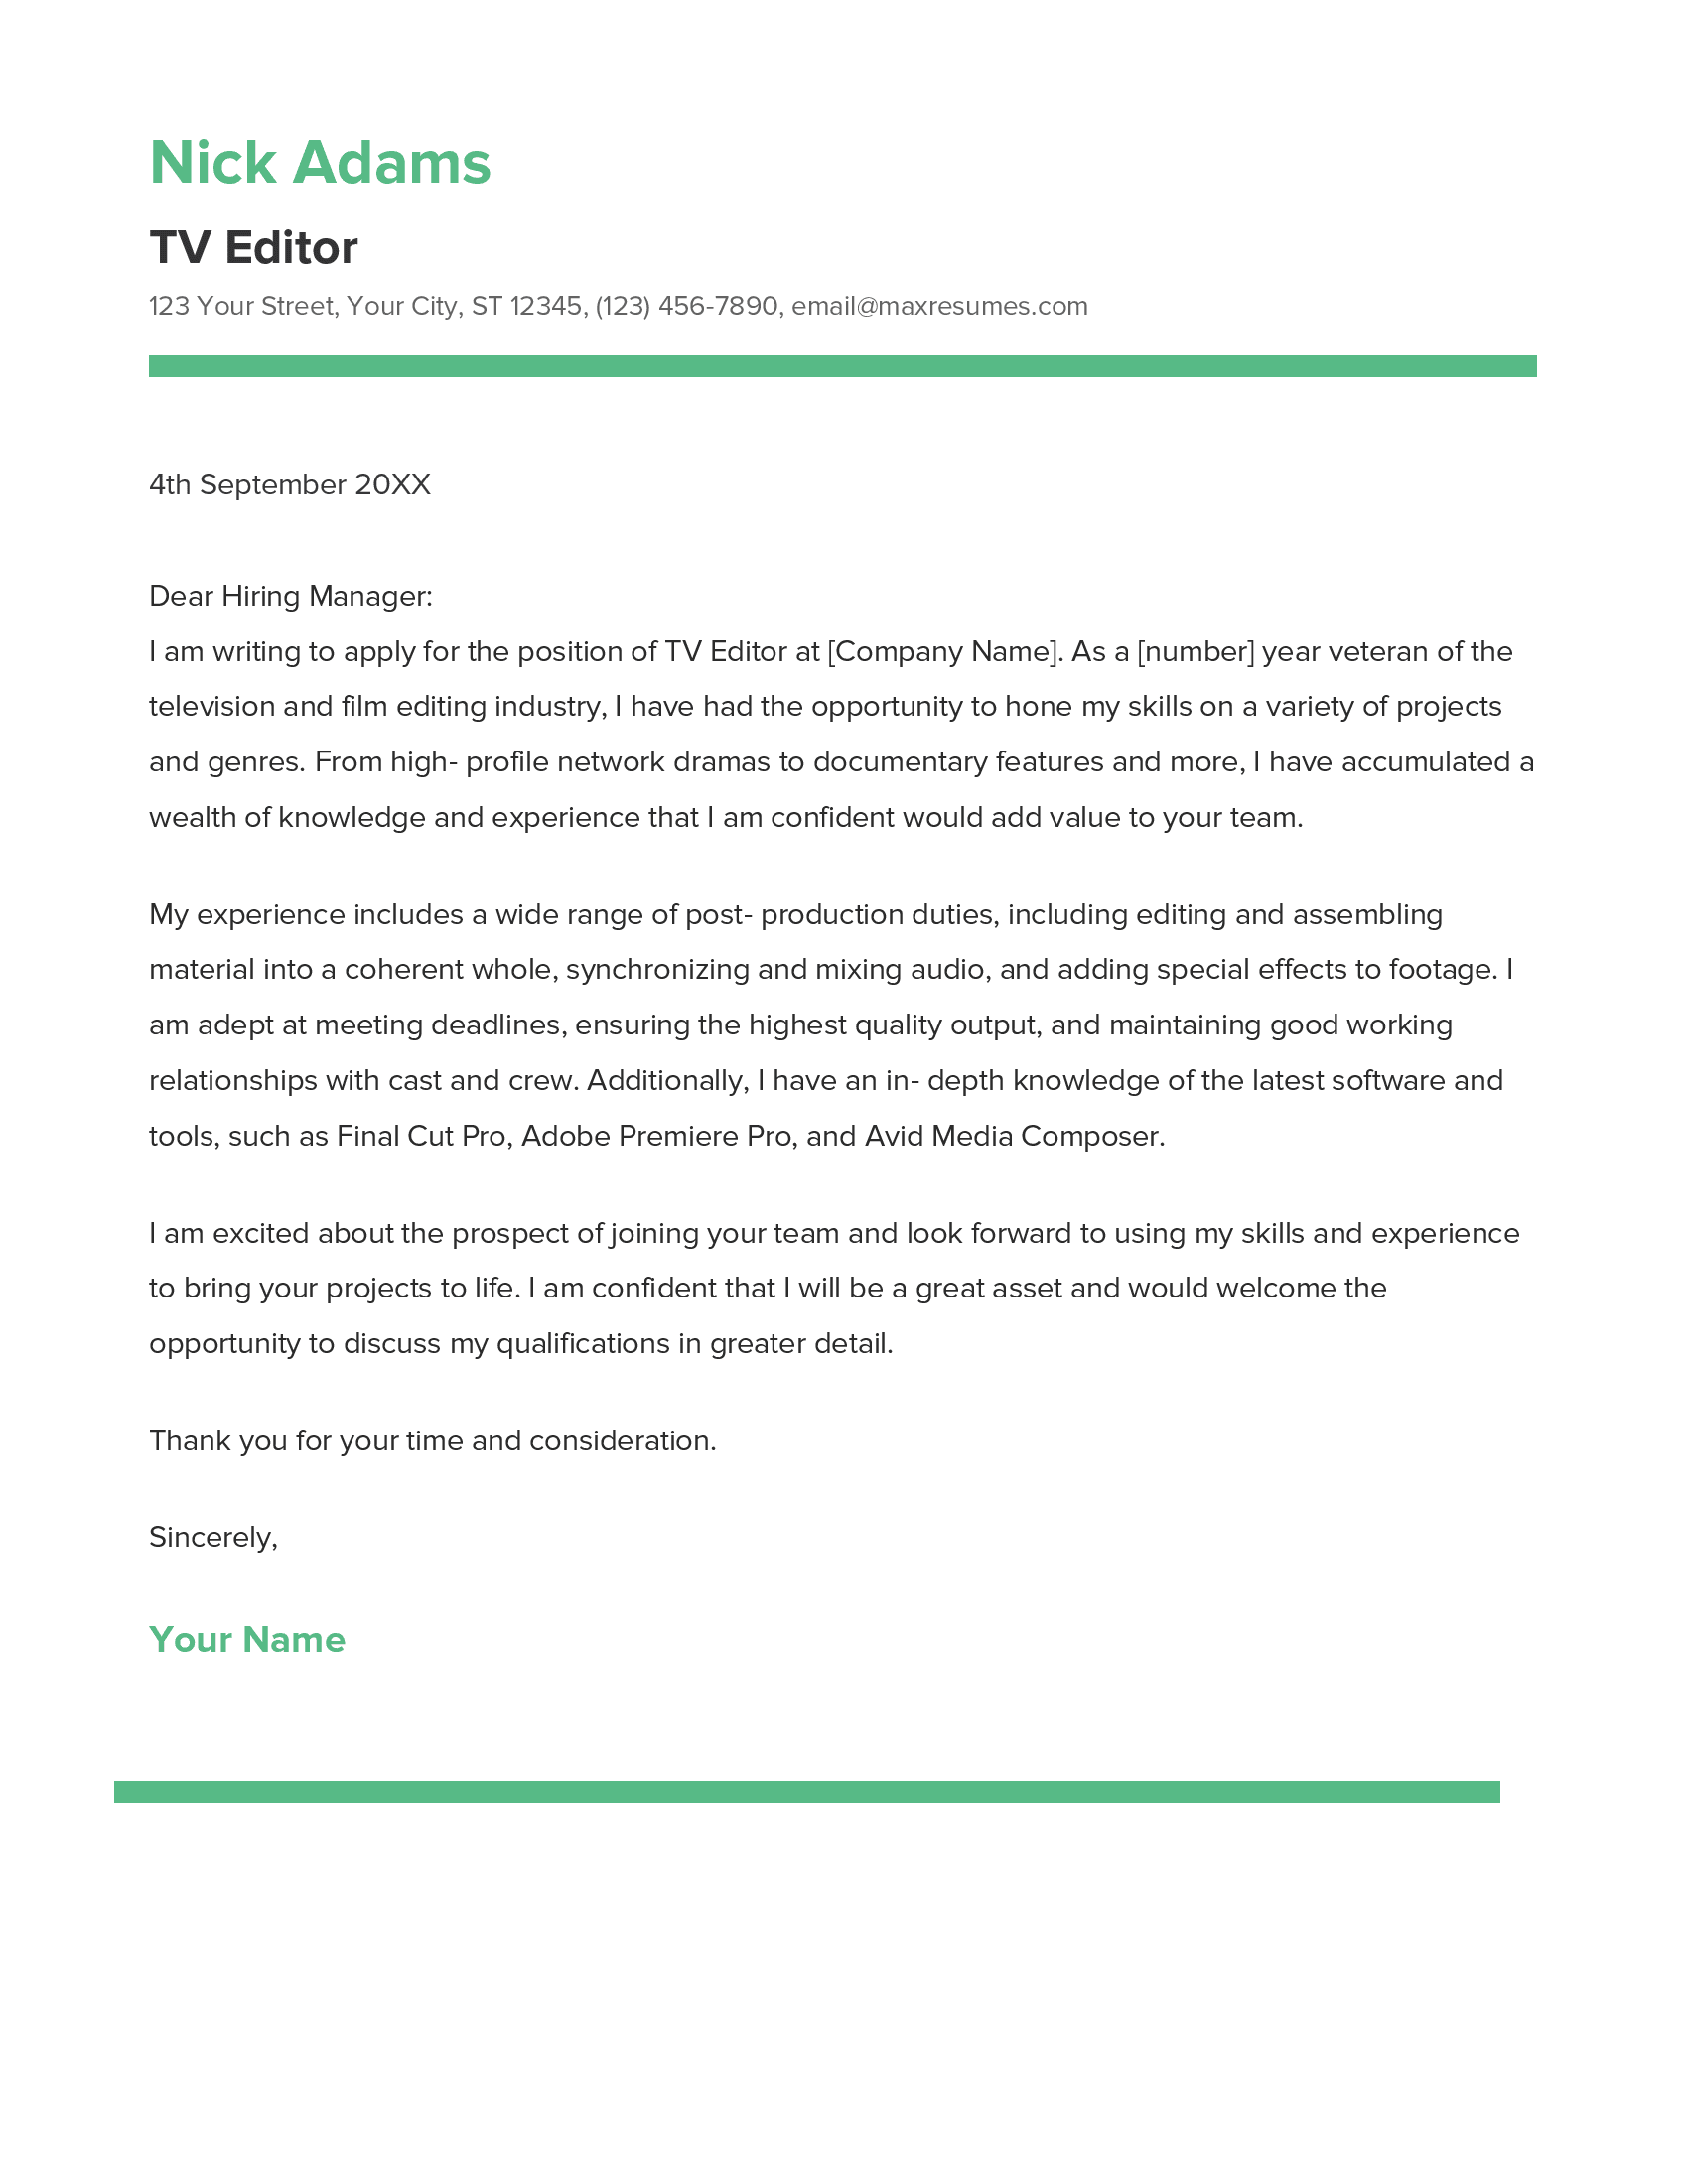 TV Editor Cover Letter Example